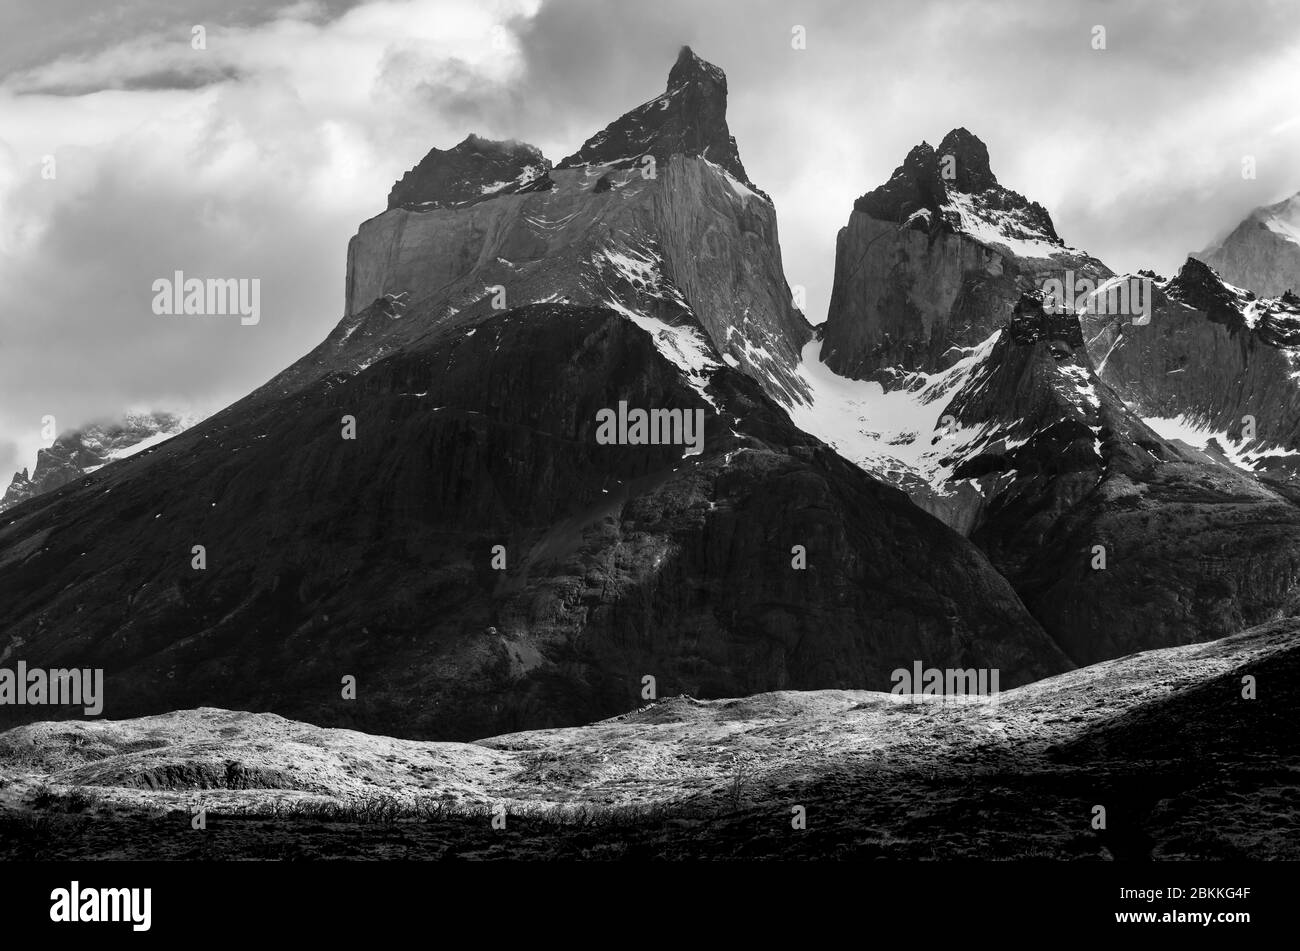 Black and white landscape of the Cuernos del Paine mountain peaks with vintage atmosphere, Torres del Paine national park, Patagonia, Chile. Stock Photo